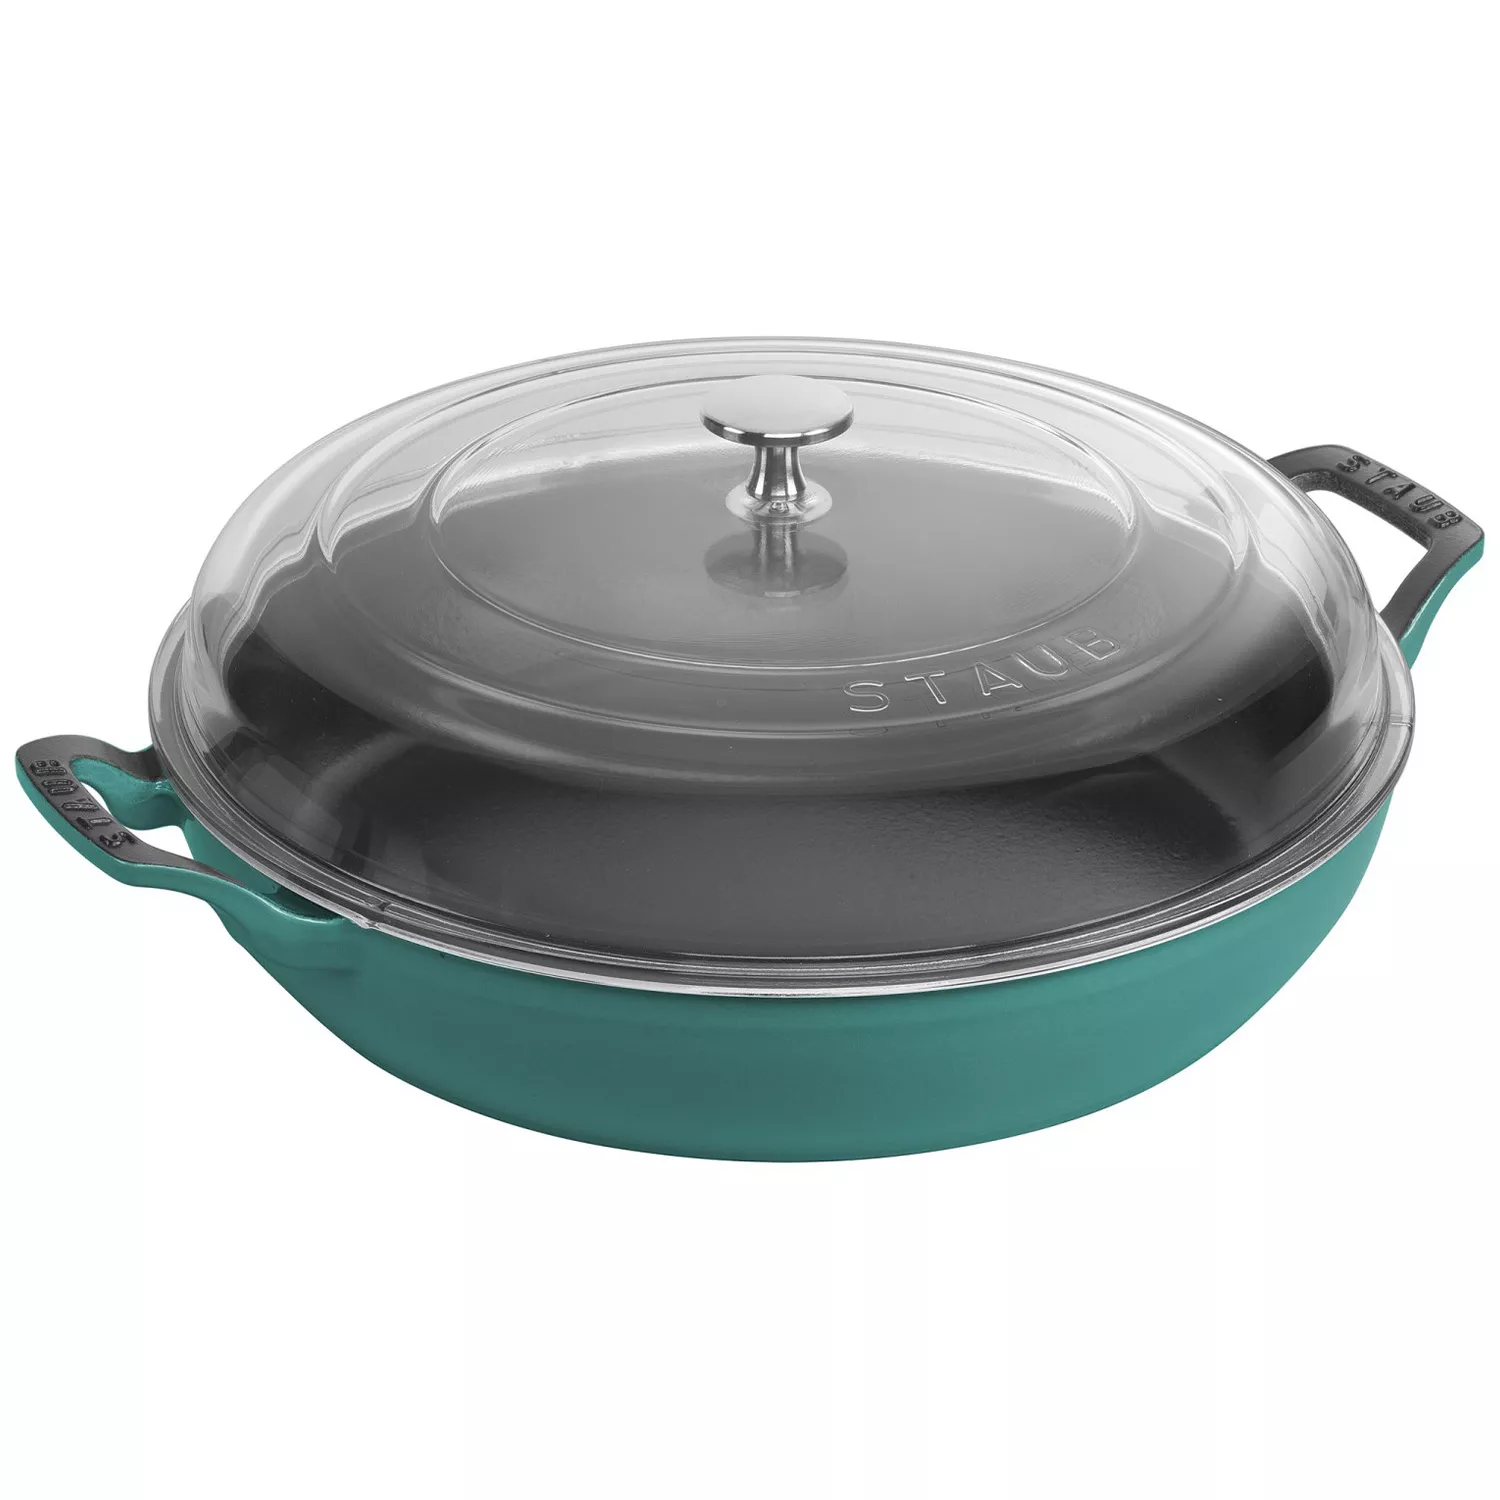 Staub Cast Iron 10-Inch, Daily Pan with Glass Lid, Blueberry